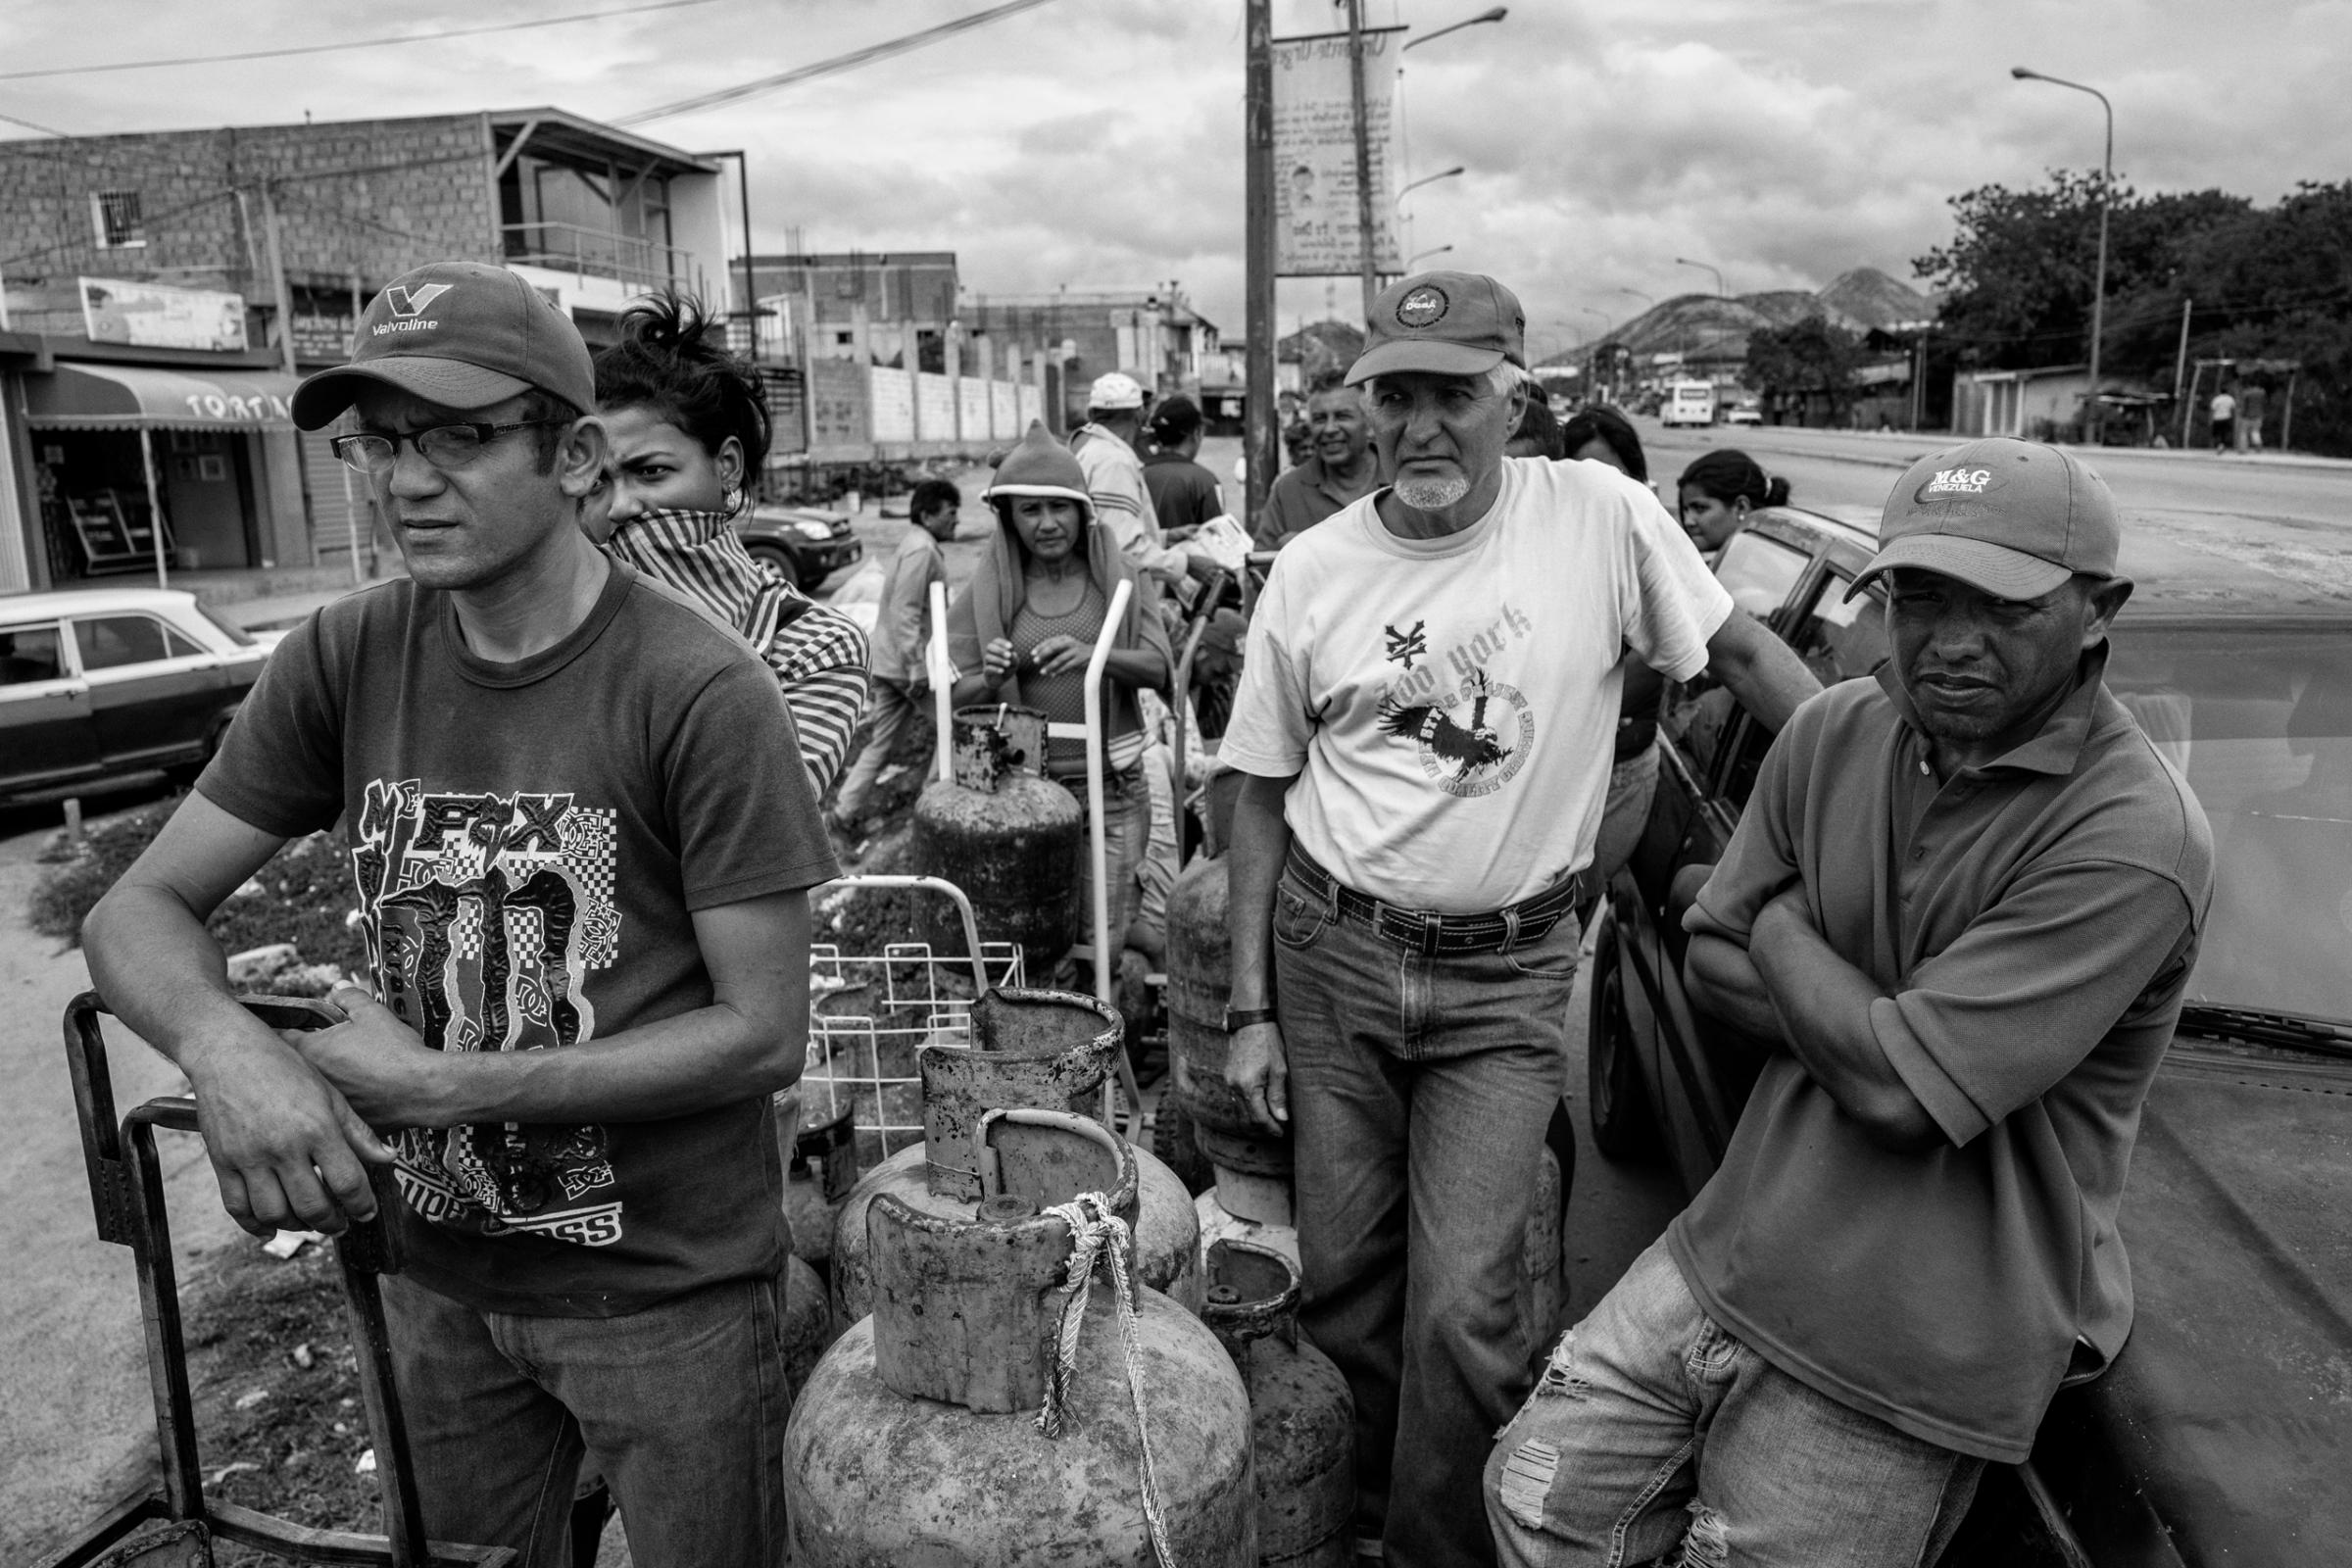 People line up for gas, which is needed for cooking and hot water. Because of severe shortages in the country, tension and discontent among the civilian population has grown resulting in outbreaks of violence and looting throughout the country, Barquisimeto, Venezuela, June 2016. BARQUISIMETO, VENEZUELA - JUNE 2016: A group of civilians queuing to get gas. Shortages in Venezuela is total. The government controls access to commodities. The tension and discontent among the civilian population is increasing and outbreaks of violence and looting are repeated throughout the country. ( Photo by Alvaro Ybarra Zavala / Getty Images Reportage for Time.)